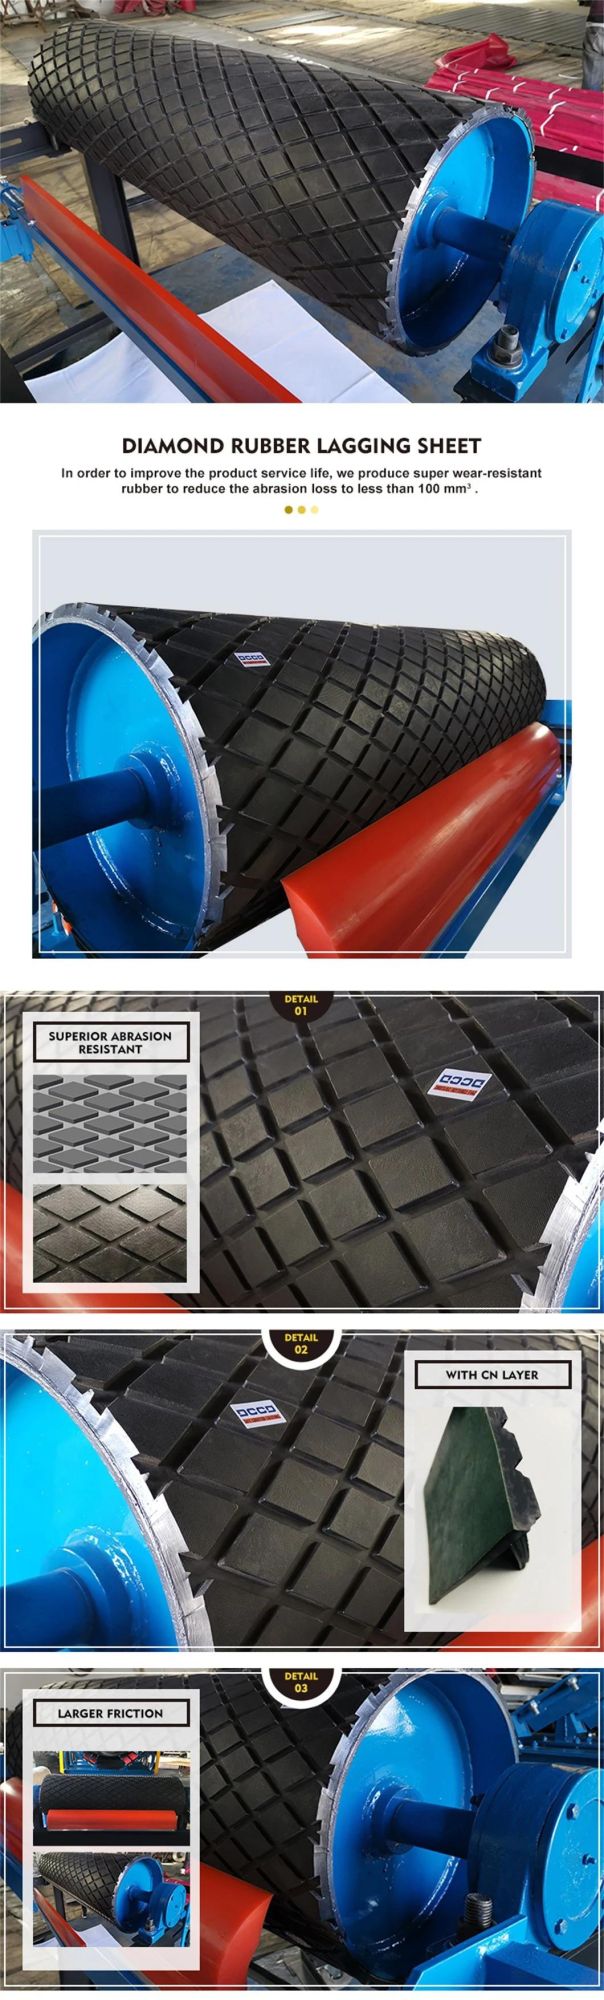 High Wear Resistant Cn Layer Conveyor Pulley Rubber Lagging Sheet with Diamond Pattern Lagging Material Types